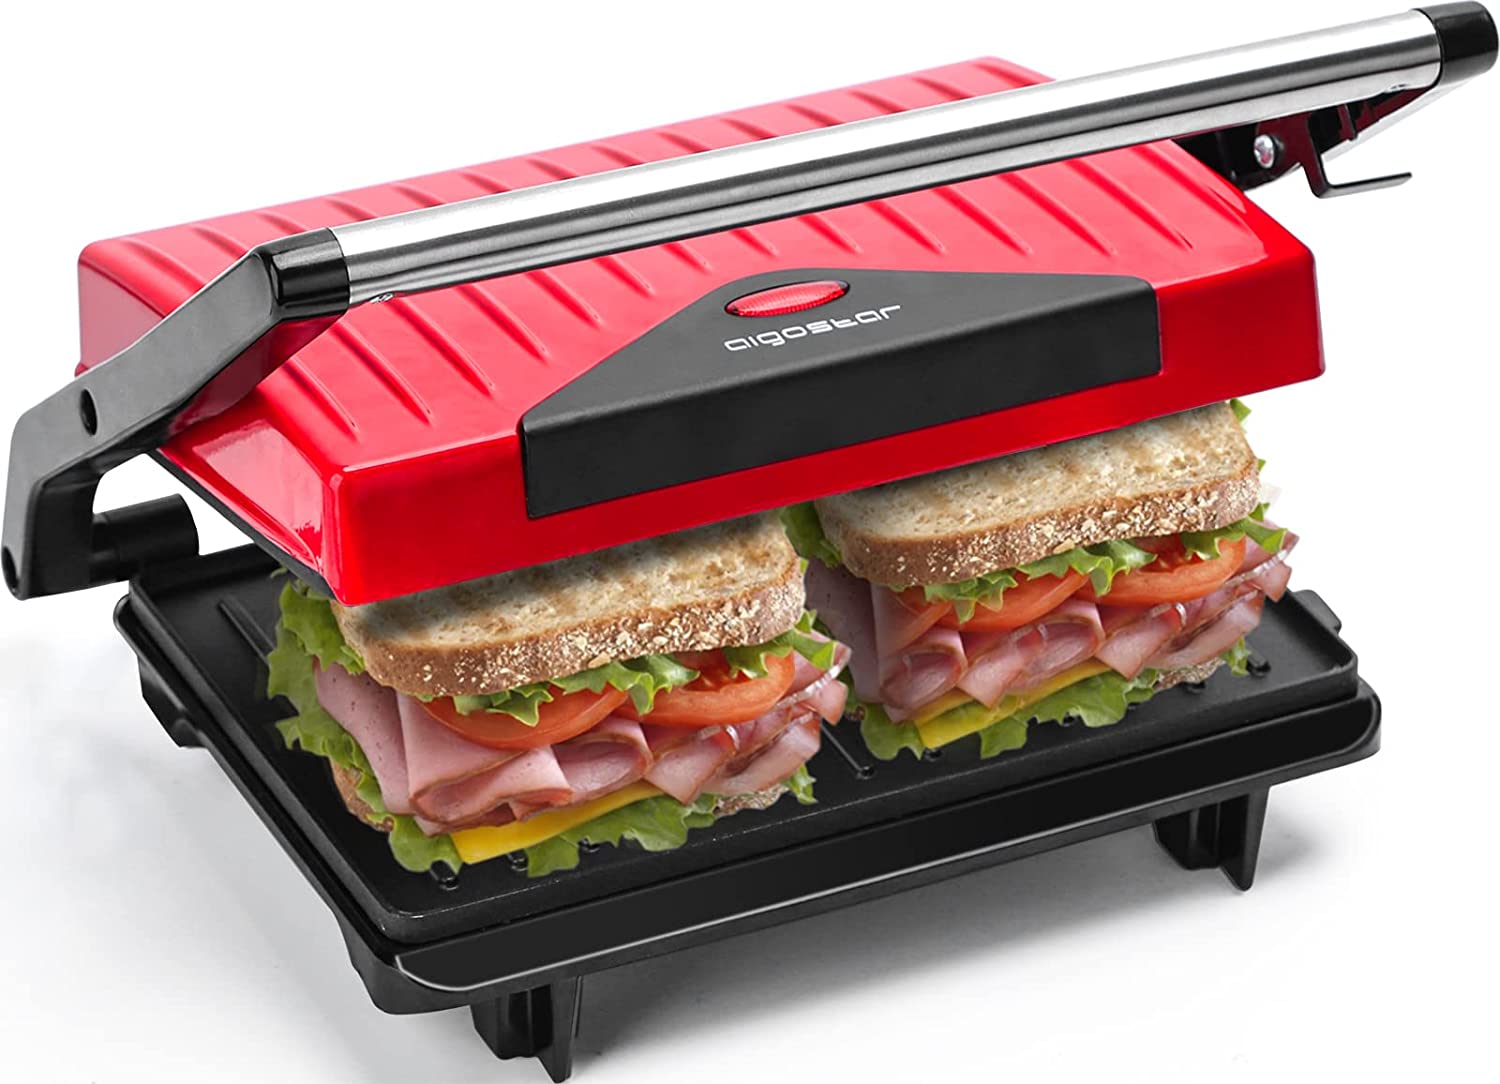 Aigostar 3-in-1 Sandwich Maker, 750 W Sandwich Toaster, 3 Removable Grill Plates, Contact Grill, Waffle Iron, 3-in-1, Dishwasher Safe, Triangular Sandwich Maker, Non-Stick, Black